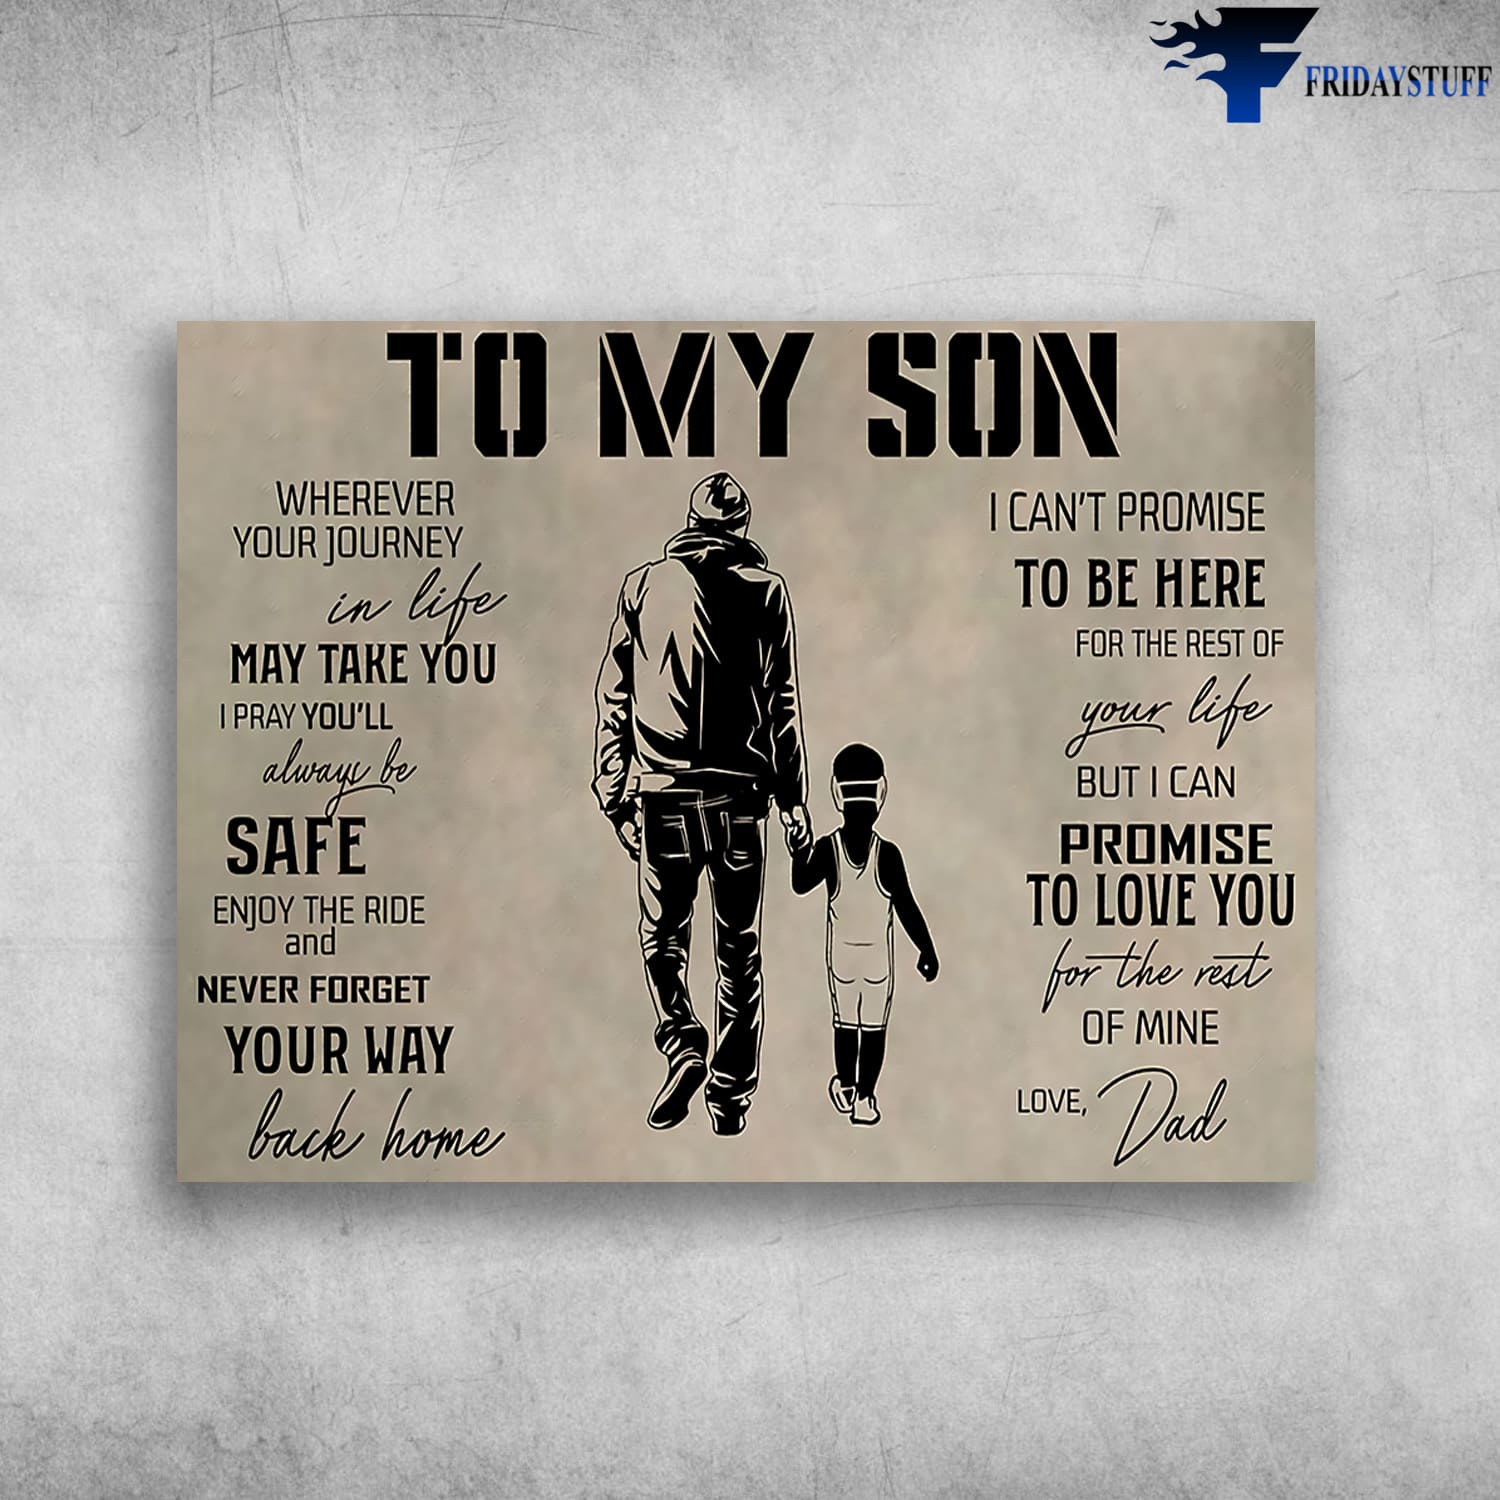 Dad And Son, Gift For Son, To My Son, Wherever Your Journey In Life, May Take You, I Pray You'll Always Be Safe, Enjoy The RIde And Never Forget Your Way Back Home